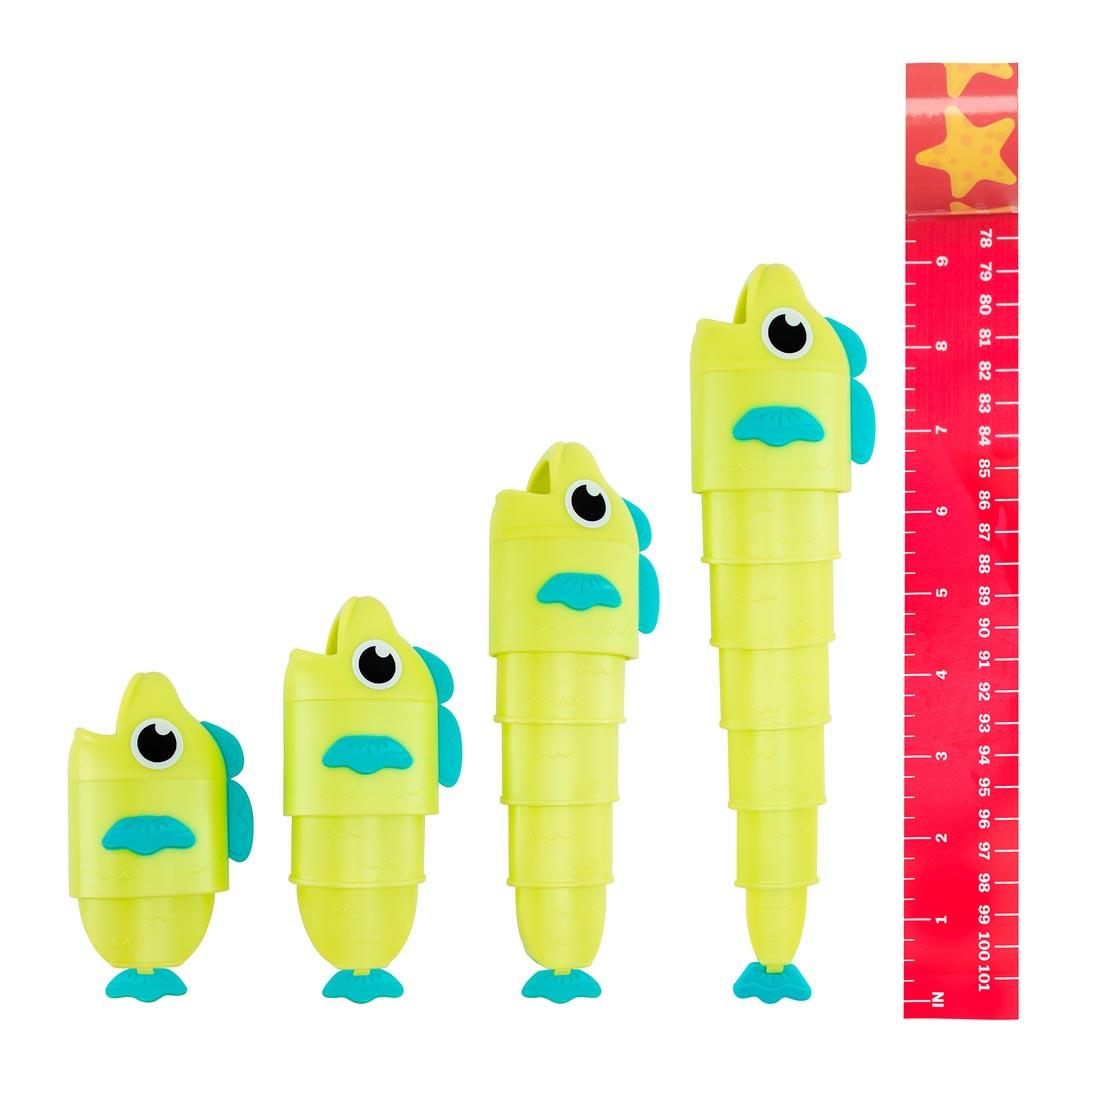 4 toy fish in different lengths with a measuring tape next to the longest fish